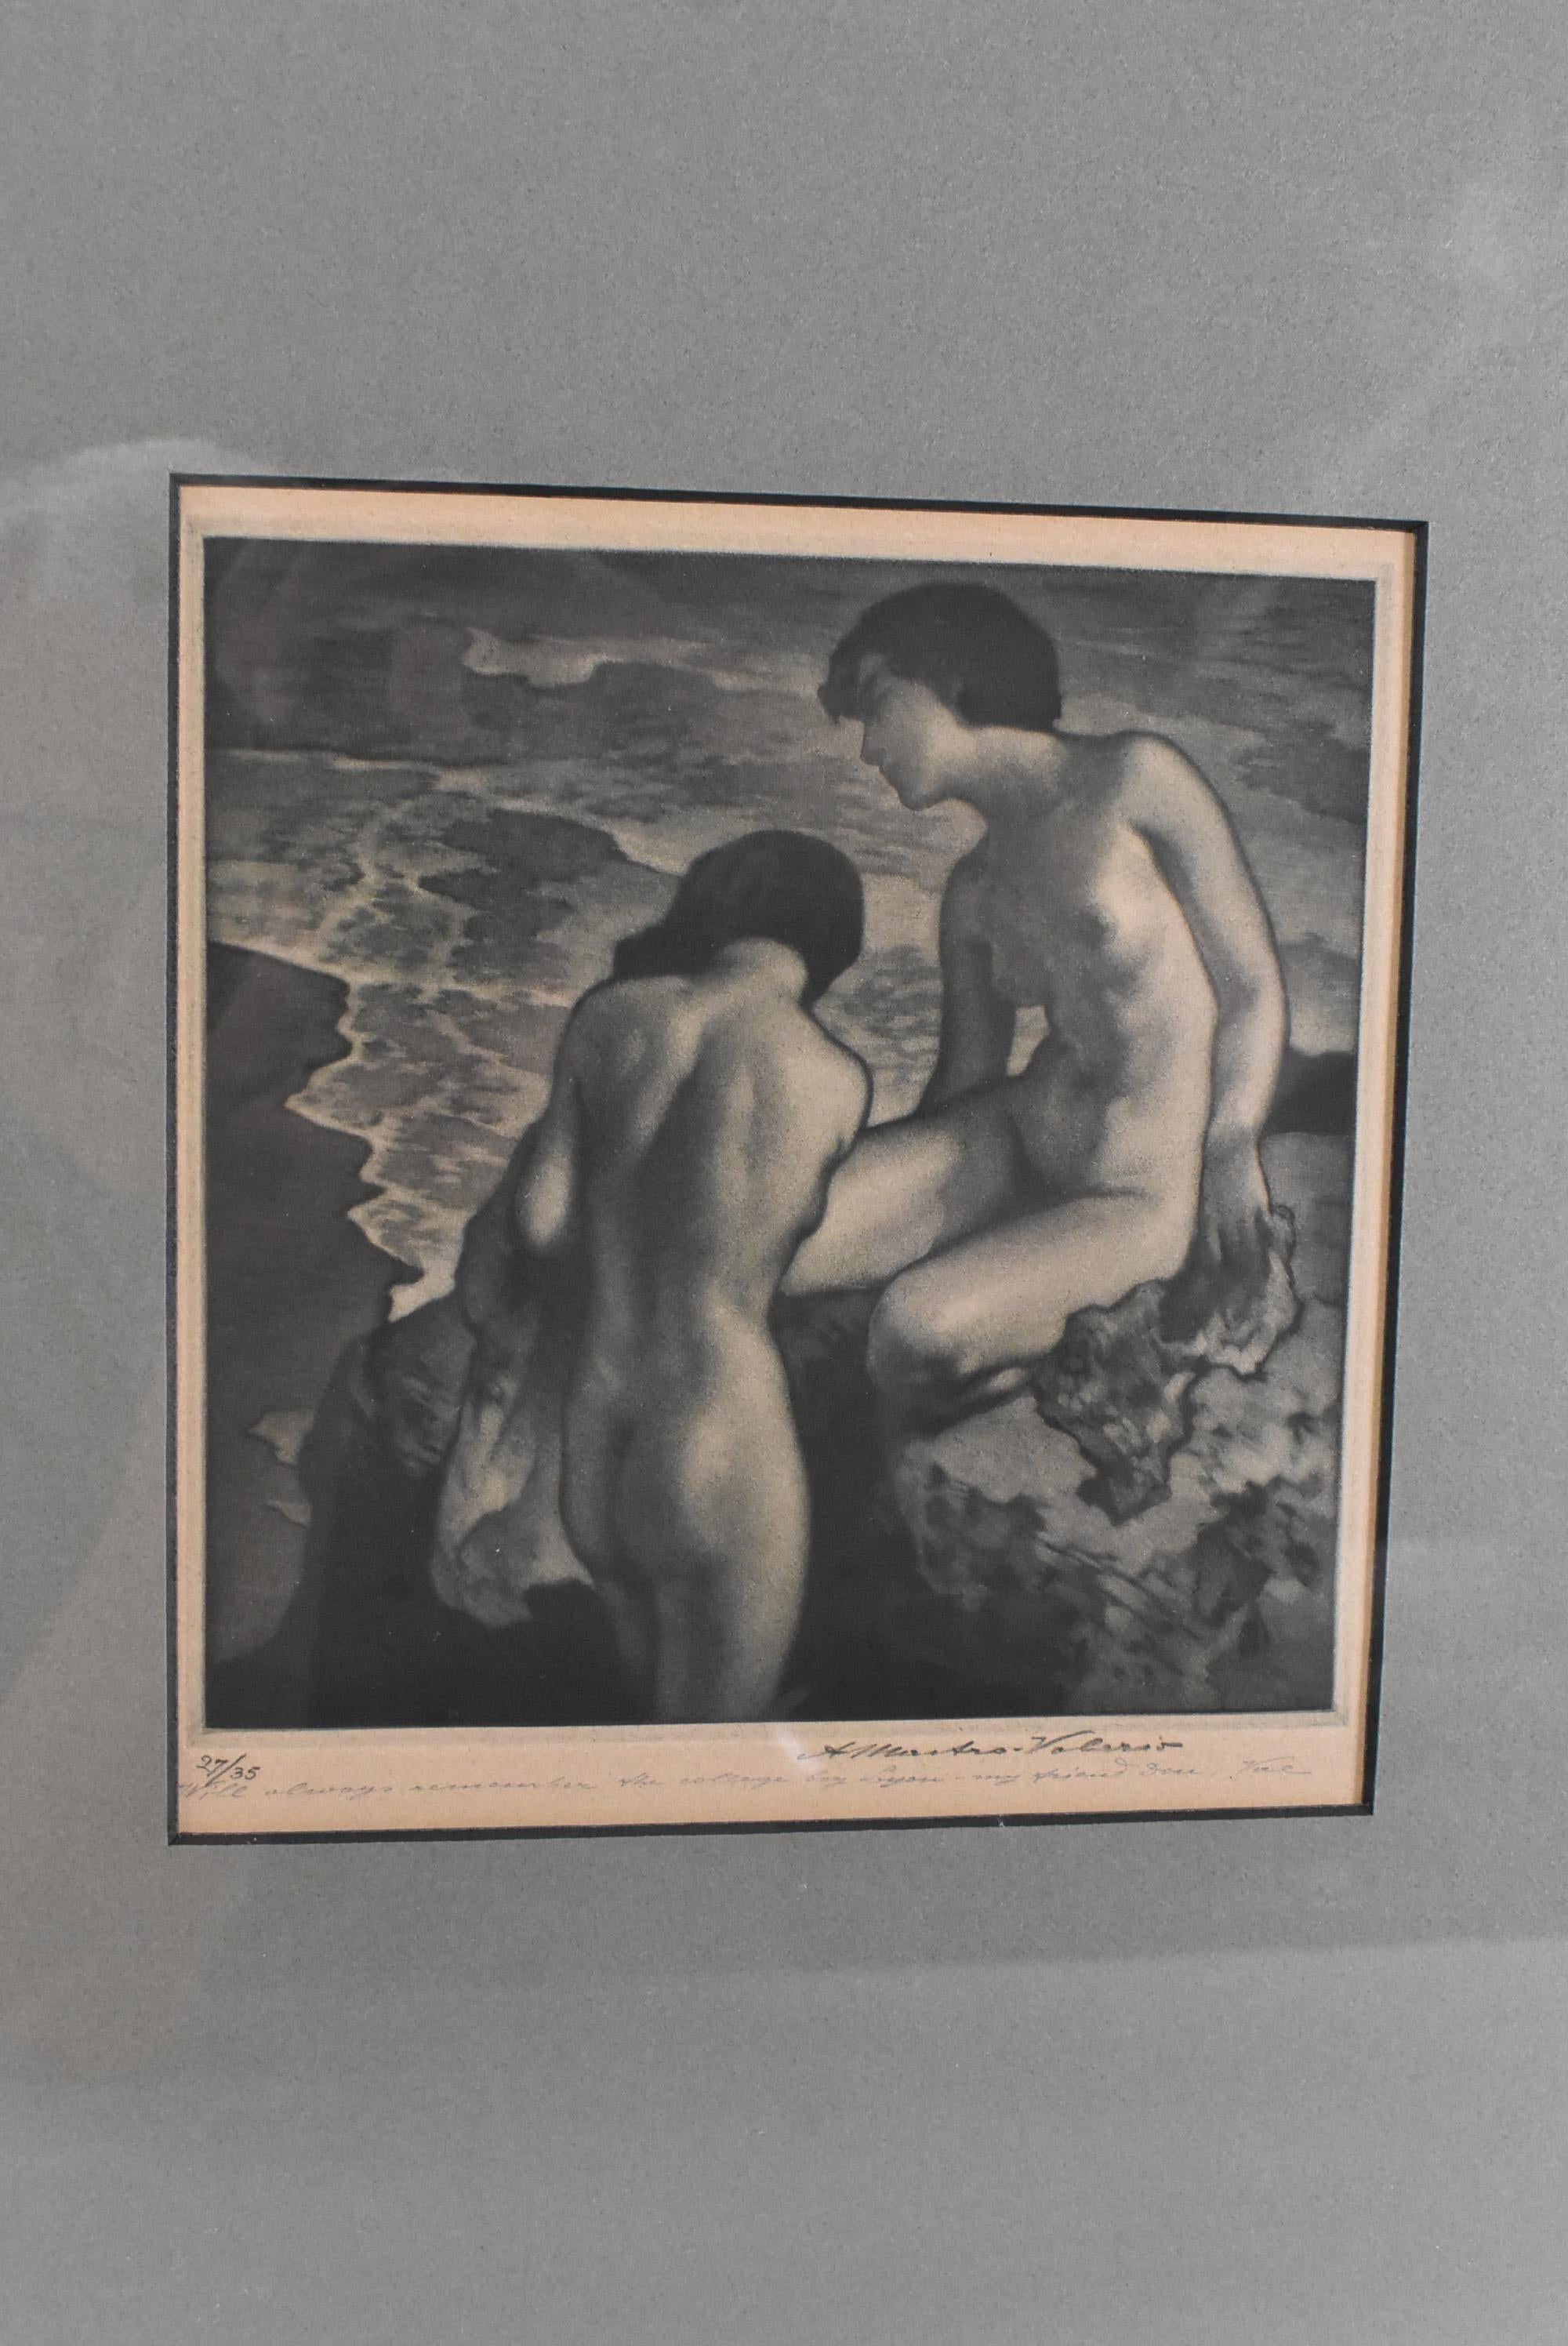 Mezzotint two nudes on the seashore lounging on a rock by Alessandro - Mastro Valerio 1887-1953. Signed lower right. Number 27/35. Hinged to backerboard. Very good condition. Light discoloration to paper from age. Frame has some wear.  Image 7 1/2